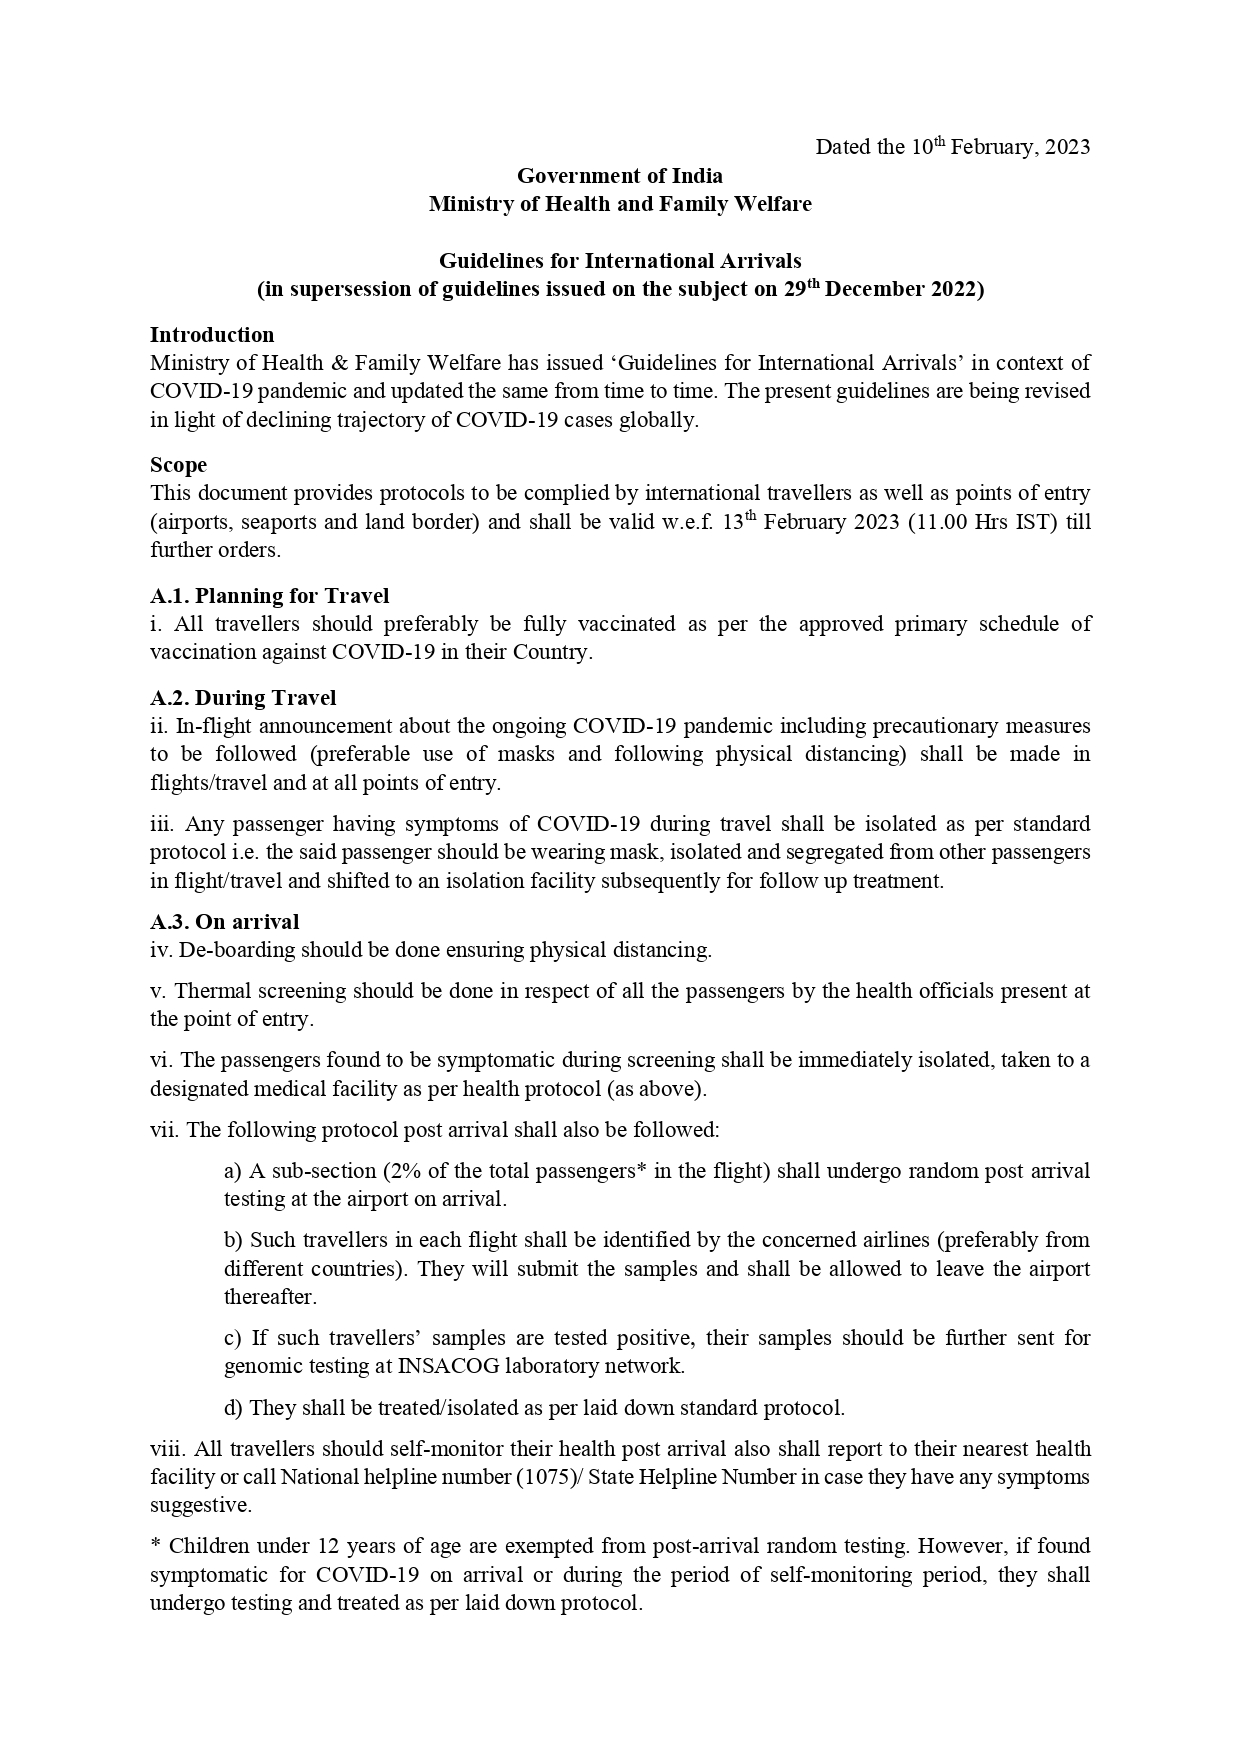 Revised Guidelines for International Arrivals in India dated 10 February 2023